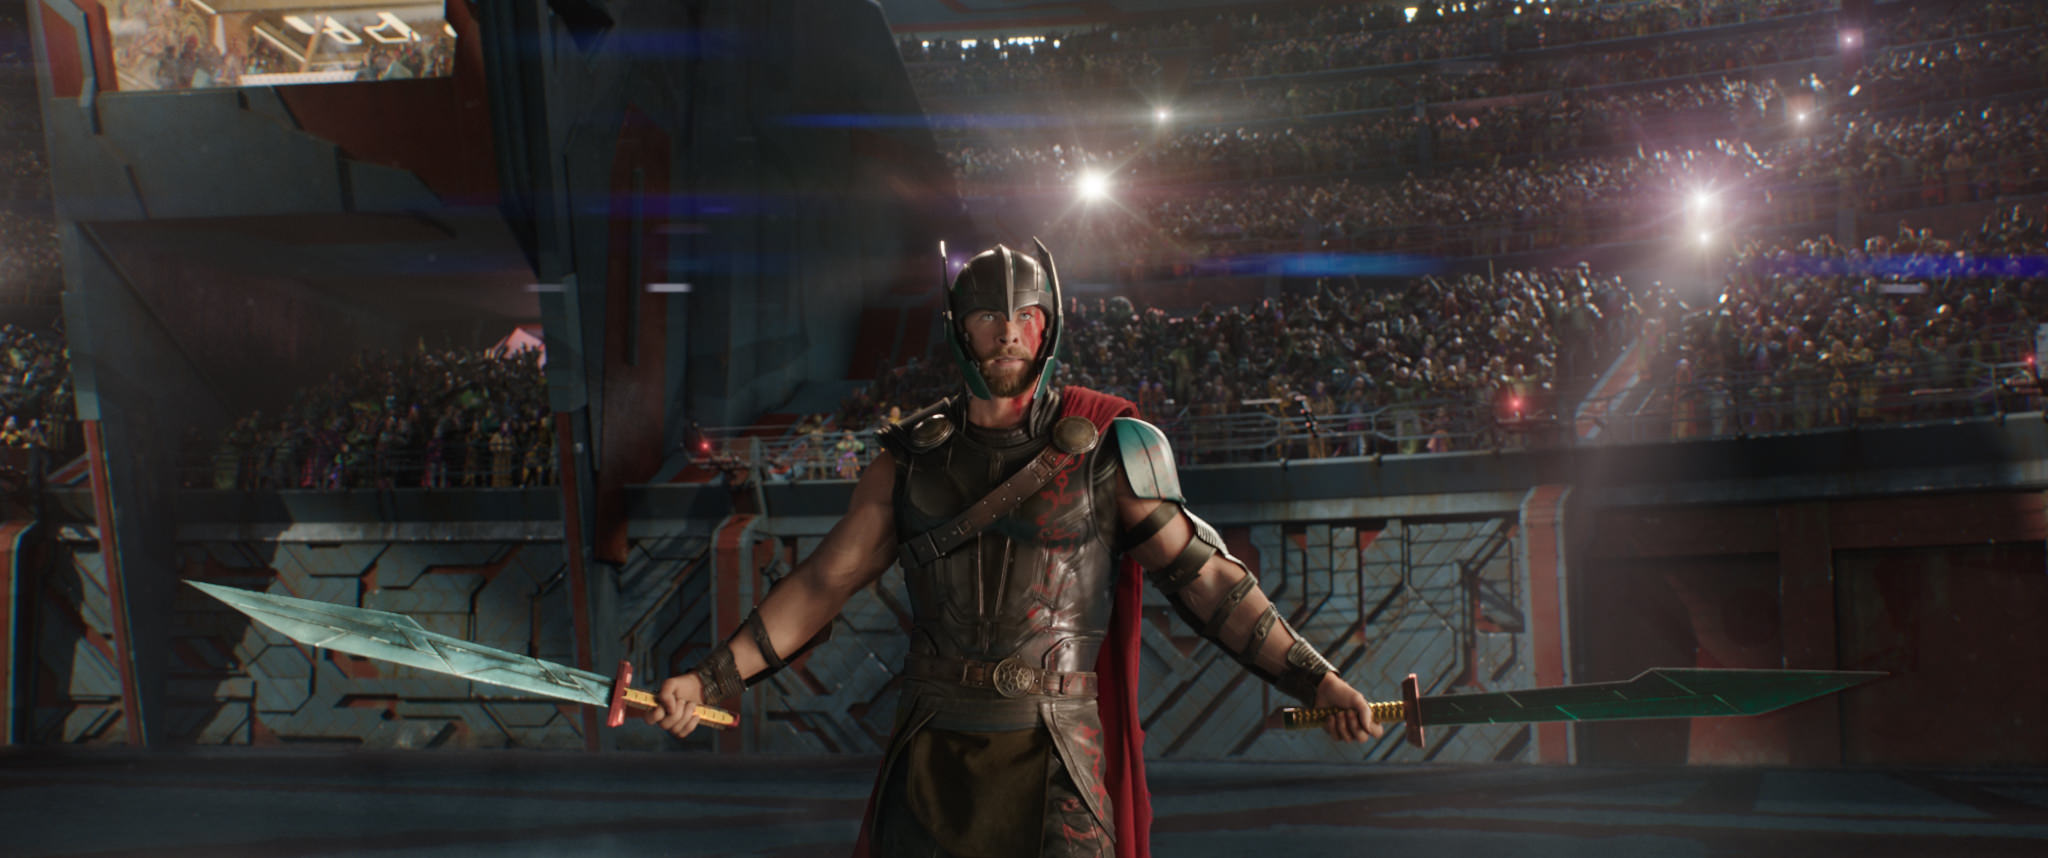 Thor: Ragnarok Breakout Characters & New Images.